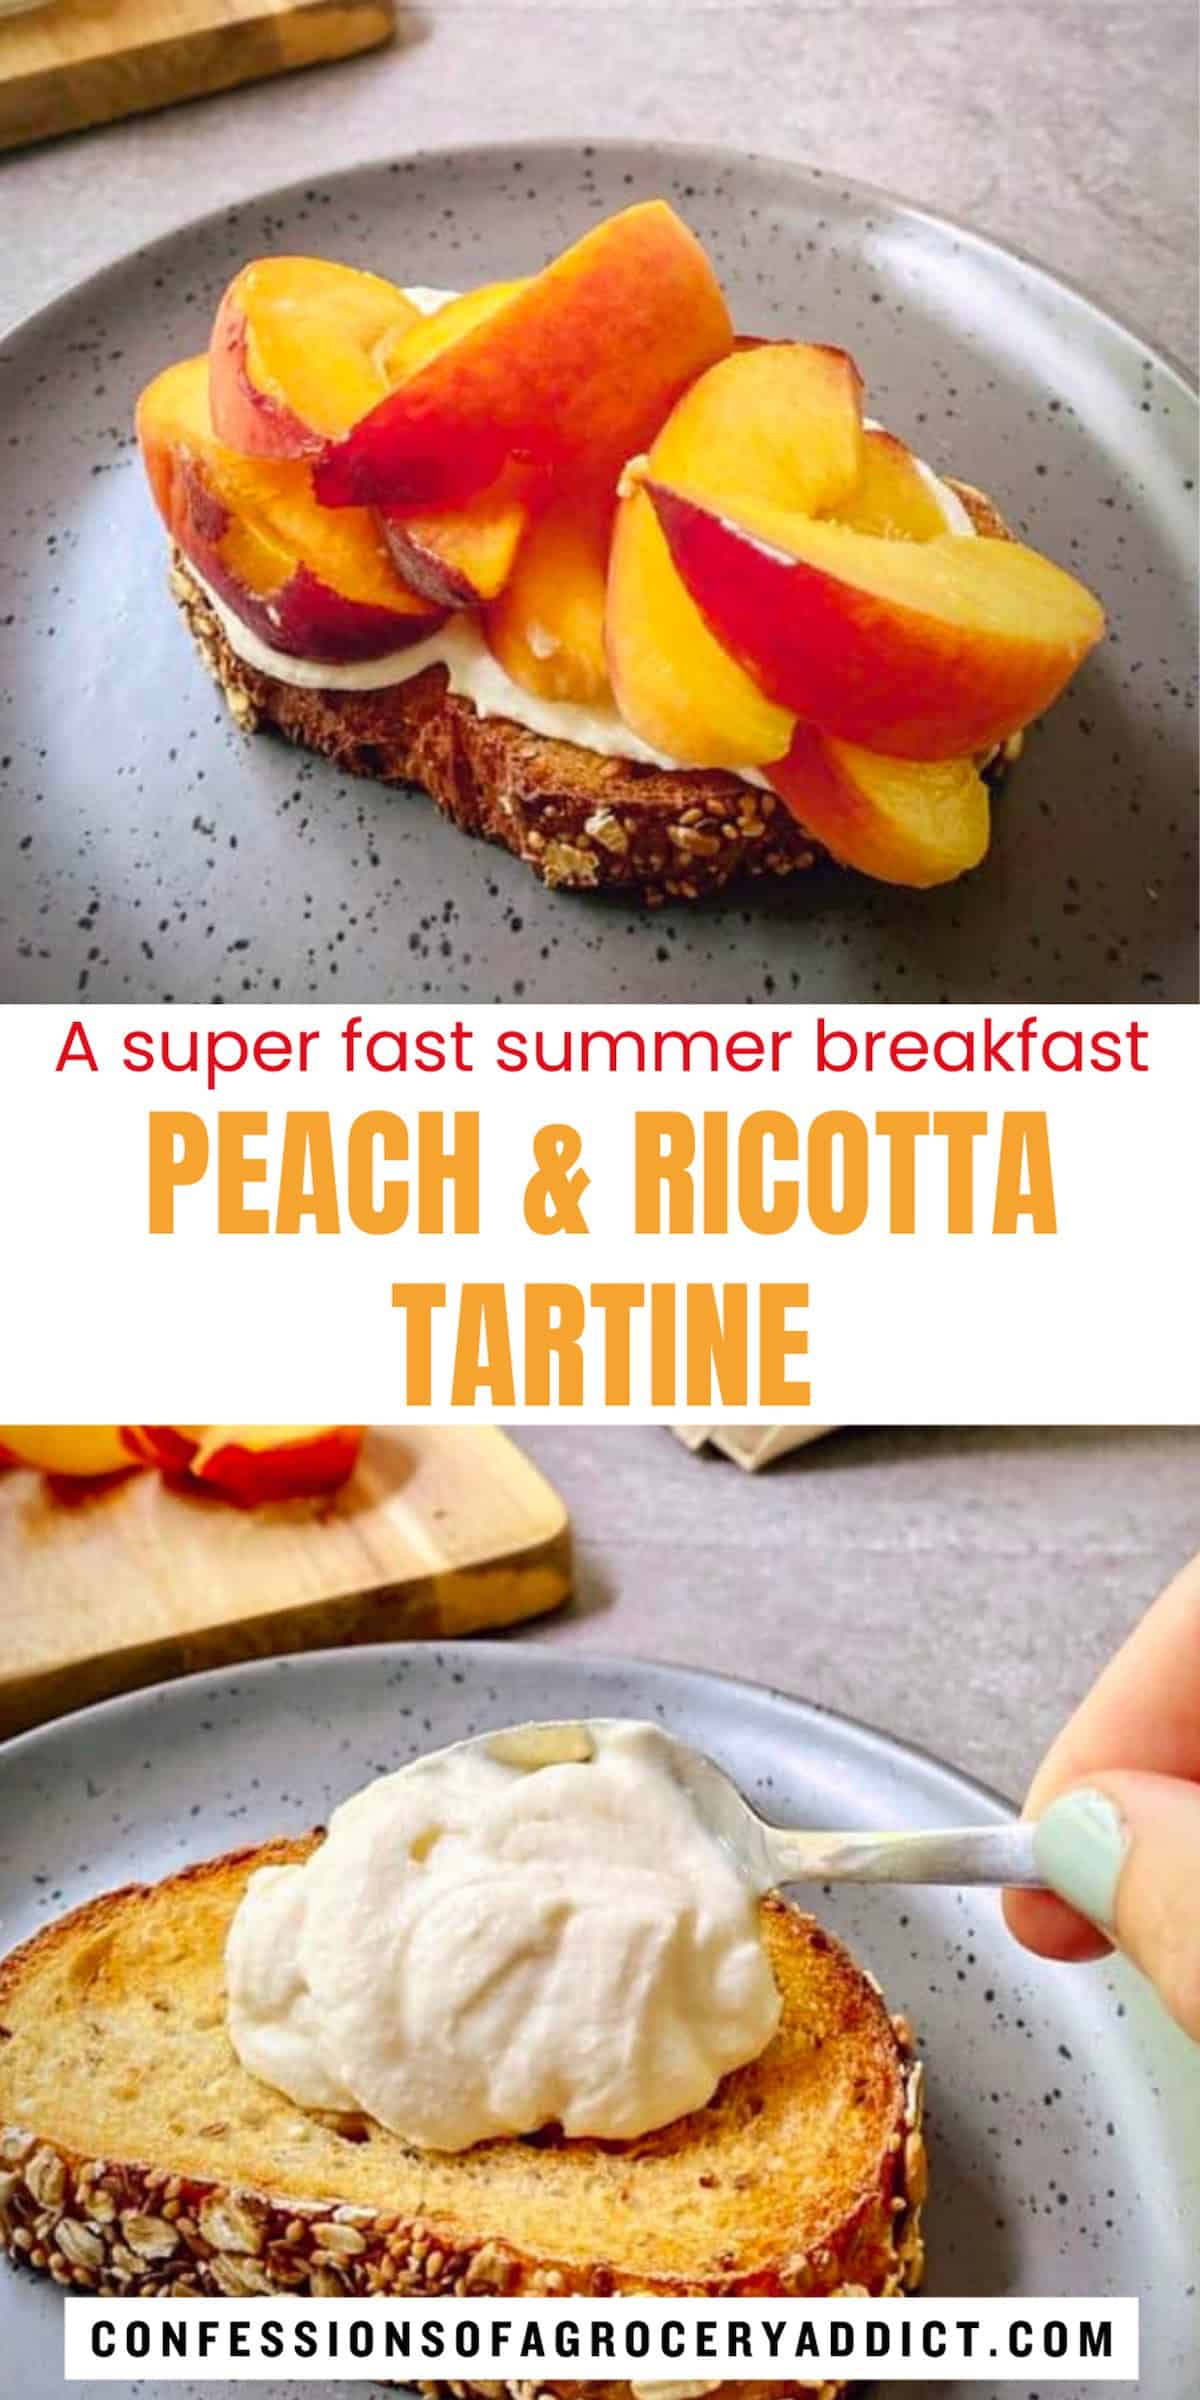 vertical pinterest pin that shows two images of different parts of assembly (the top with peach slices before drizzling with honey, the bottom with a spoon dolloping sweetened ricotta on the fried tartine bread) with text overlay that reads "a super fast summer breakfast; peach & ricotta tartine."